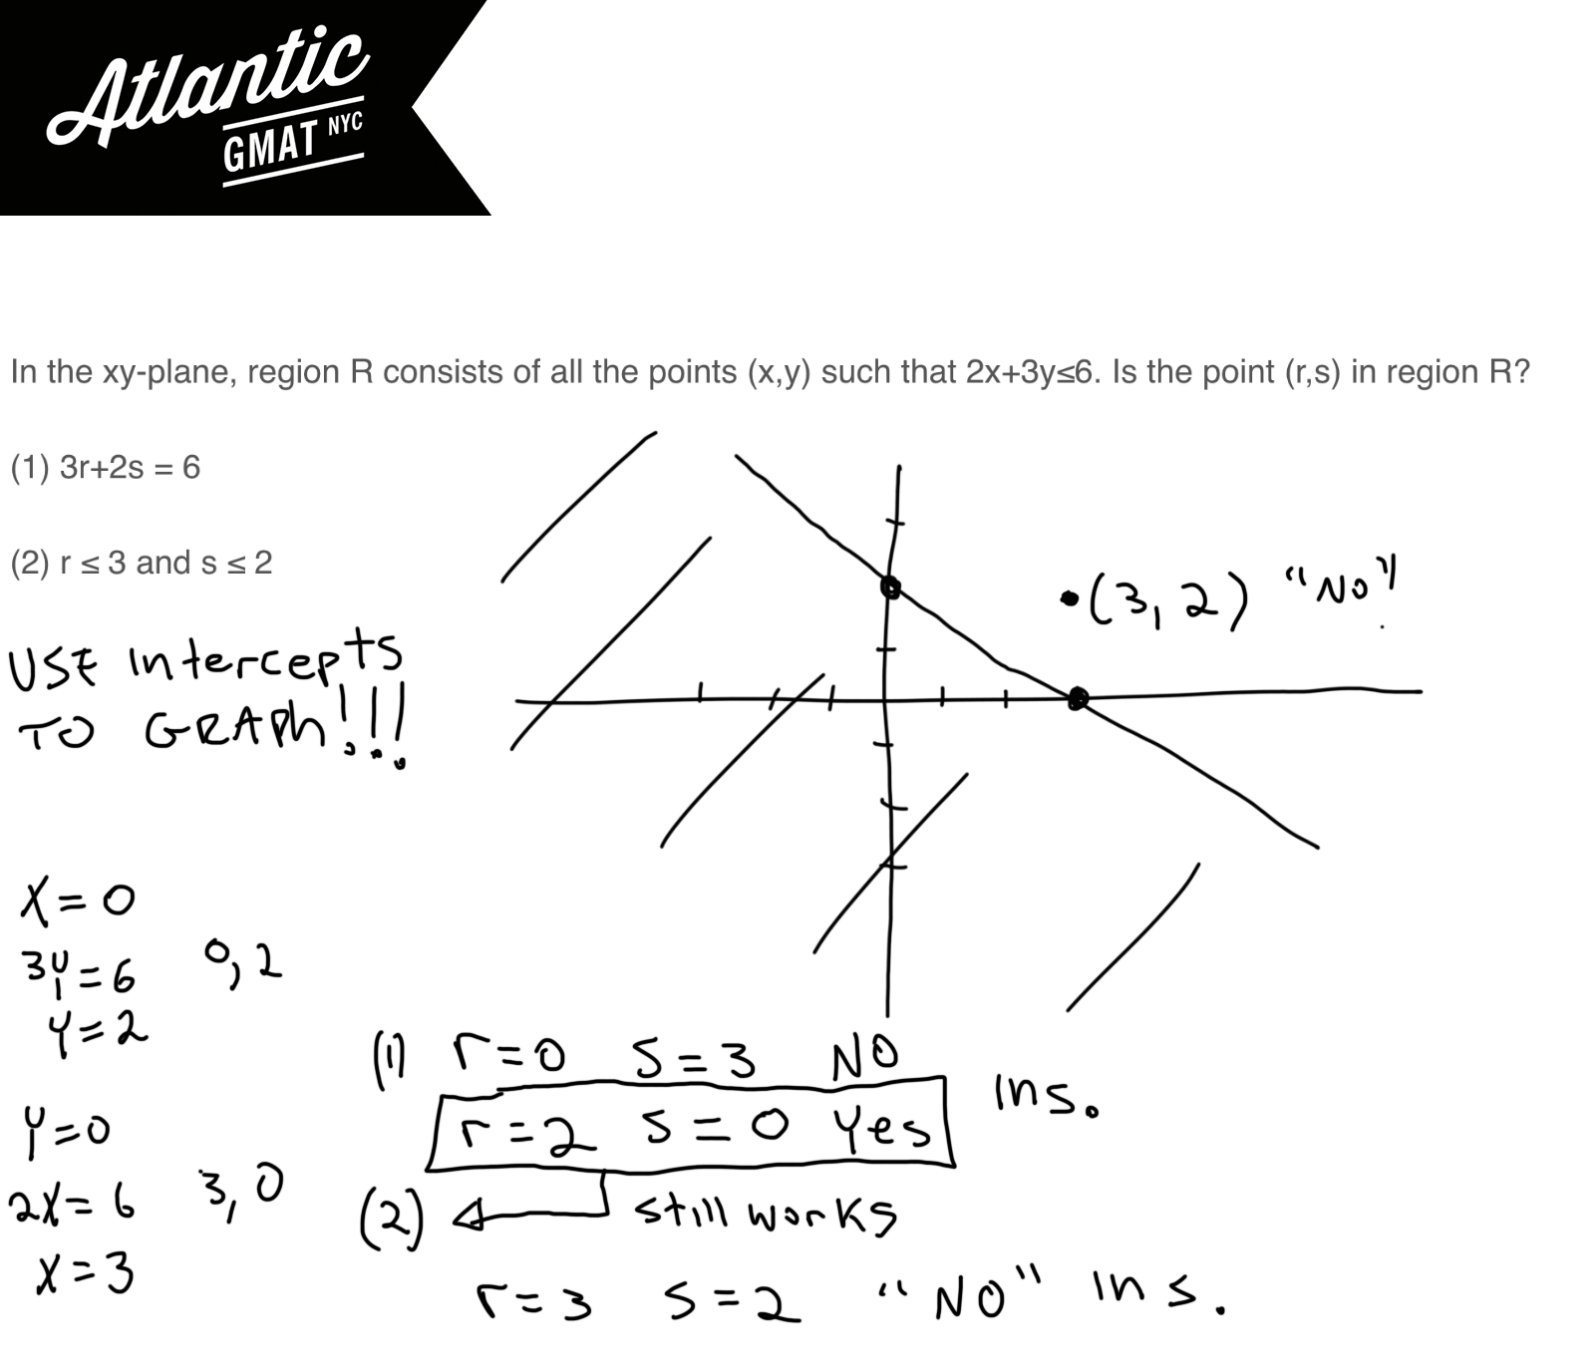 in the xy-plane, region r consists of all the points (x,y) such that 2x + 3y ≤ 6 gmat explanation 3